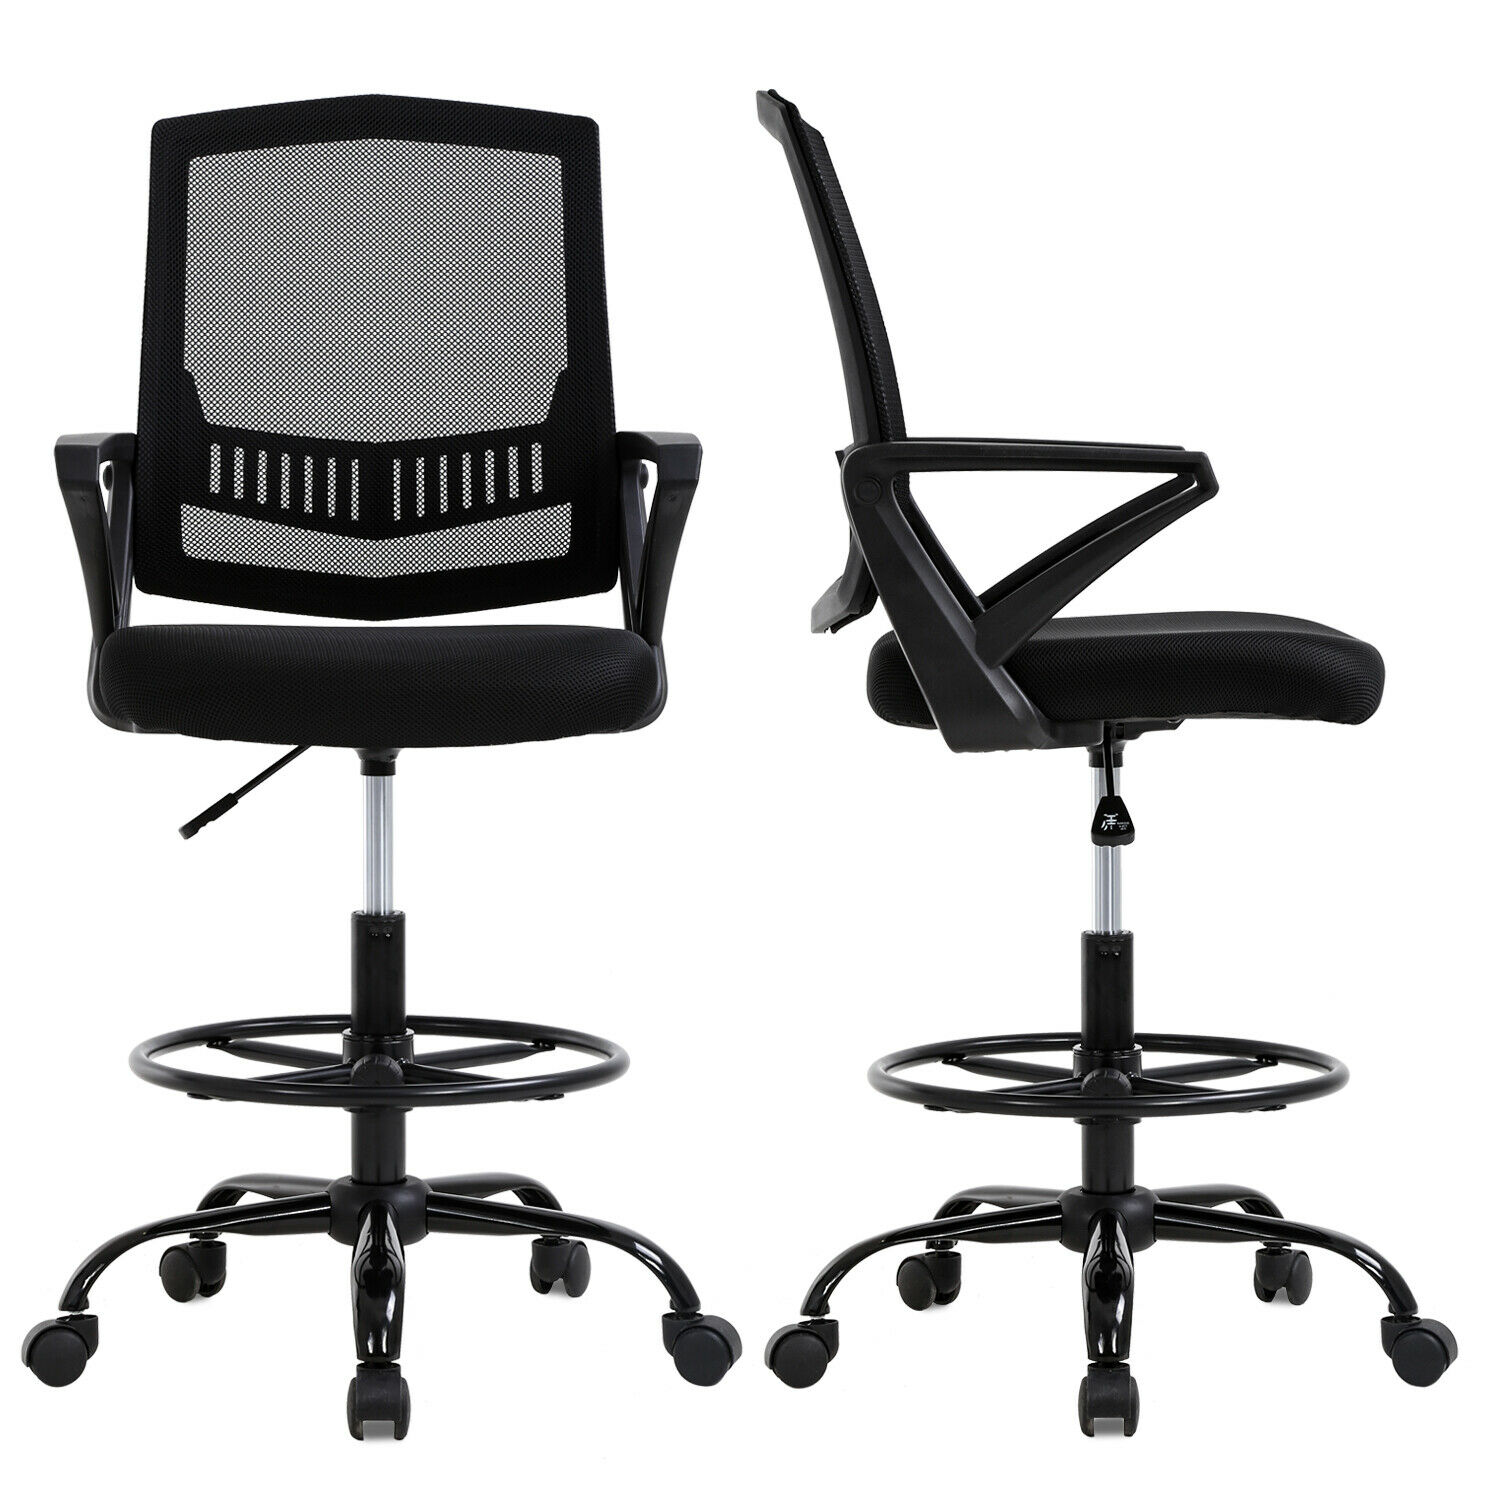 Factory Direct: Drafting Chair Tall Office Chair Desk ...